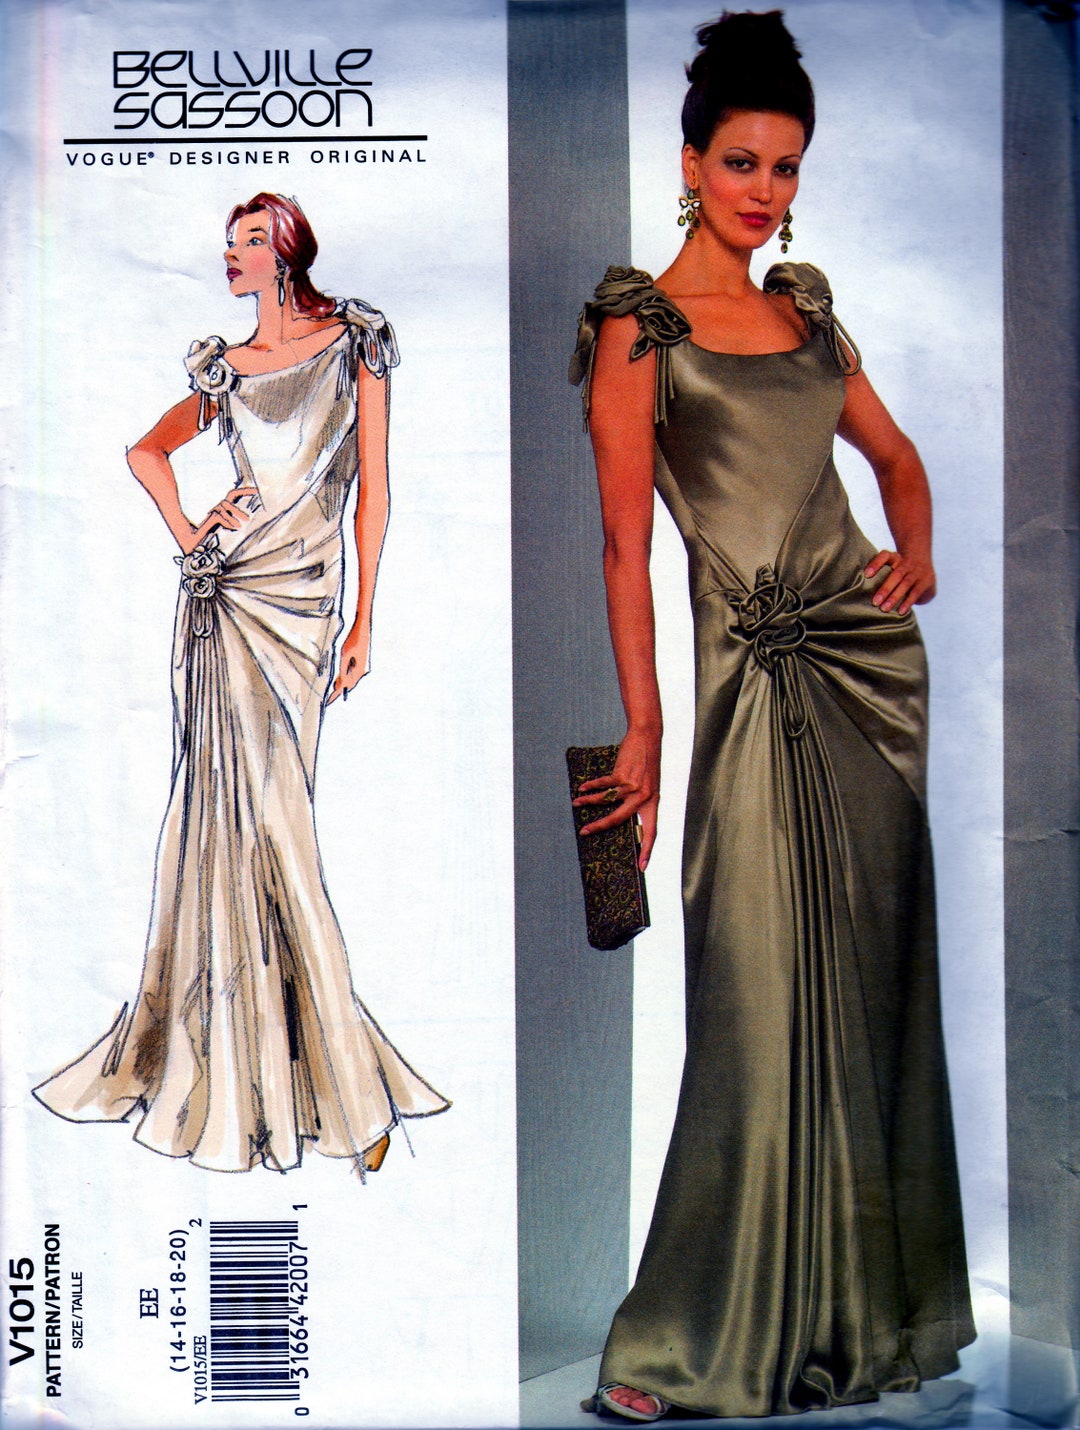 Designer Draped Gown by Bellville Sassoon Vogue 1015 Uncut Sewing ...